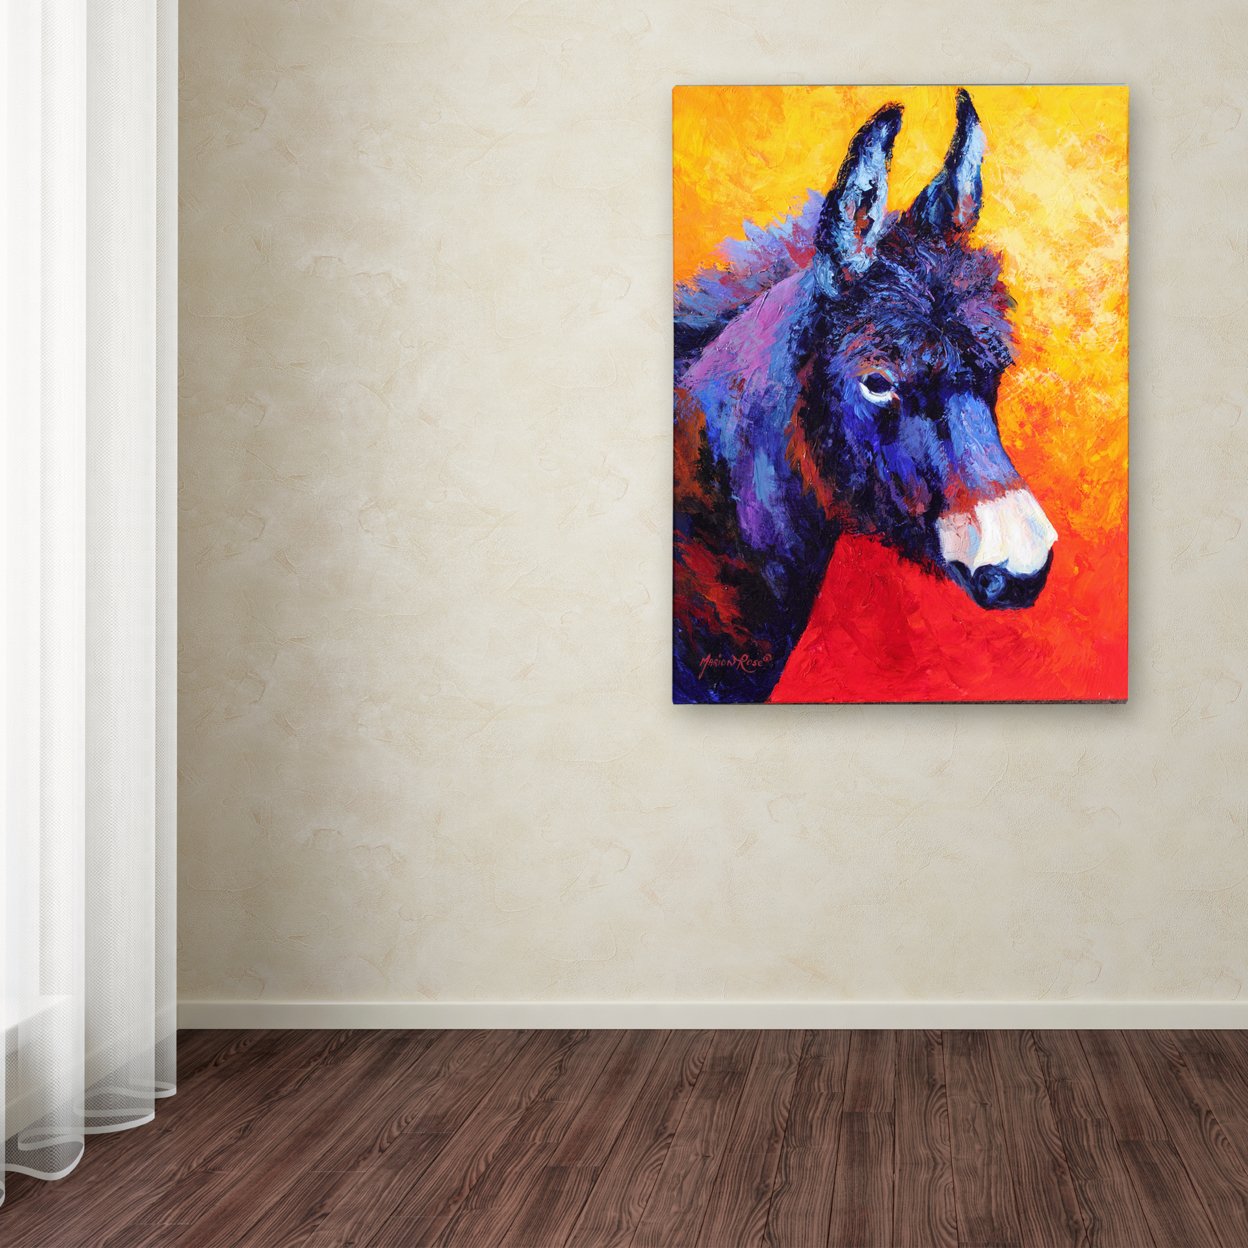 Marion Rose 'Donkey IVX' Ready To Hang Canvas Art 35 X 47 Inches Made In USA